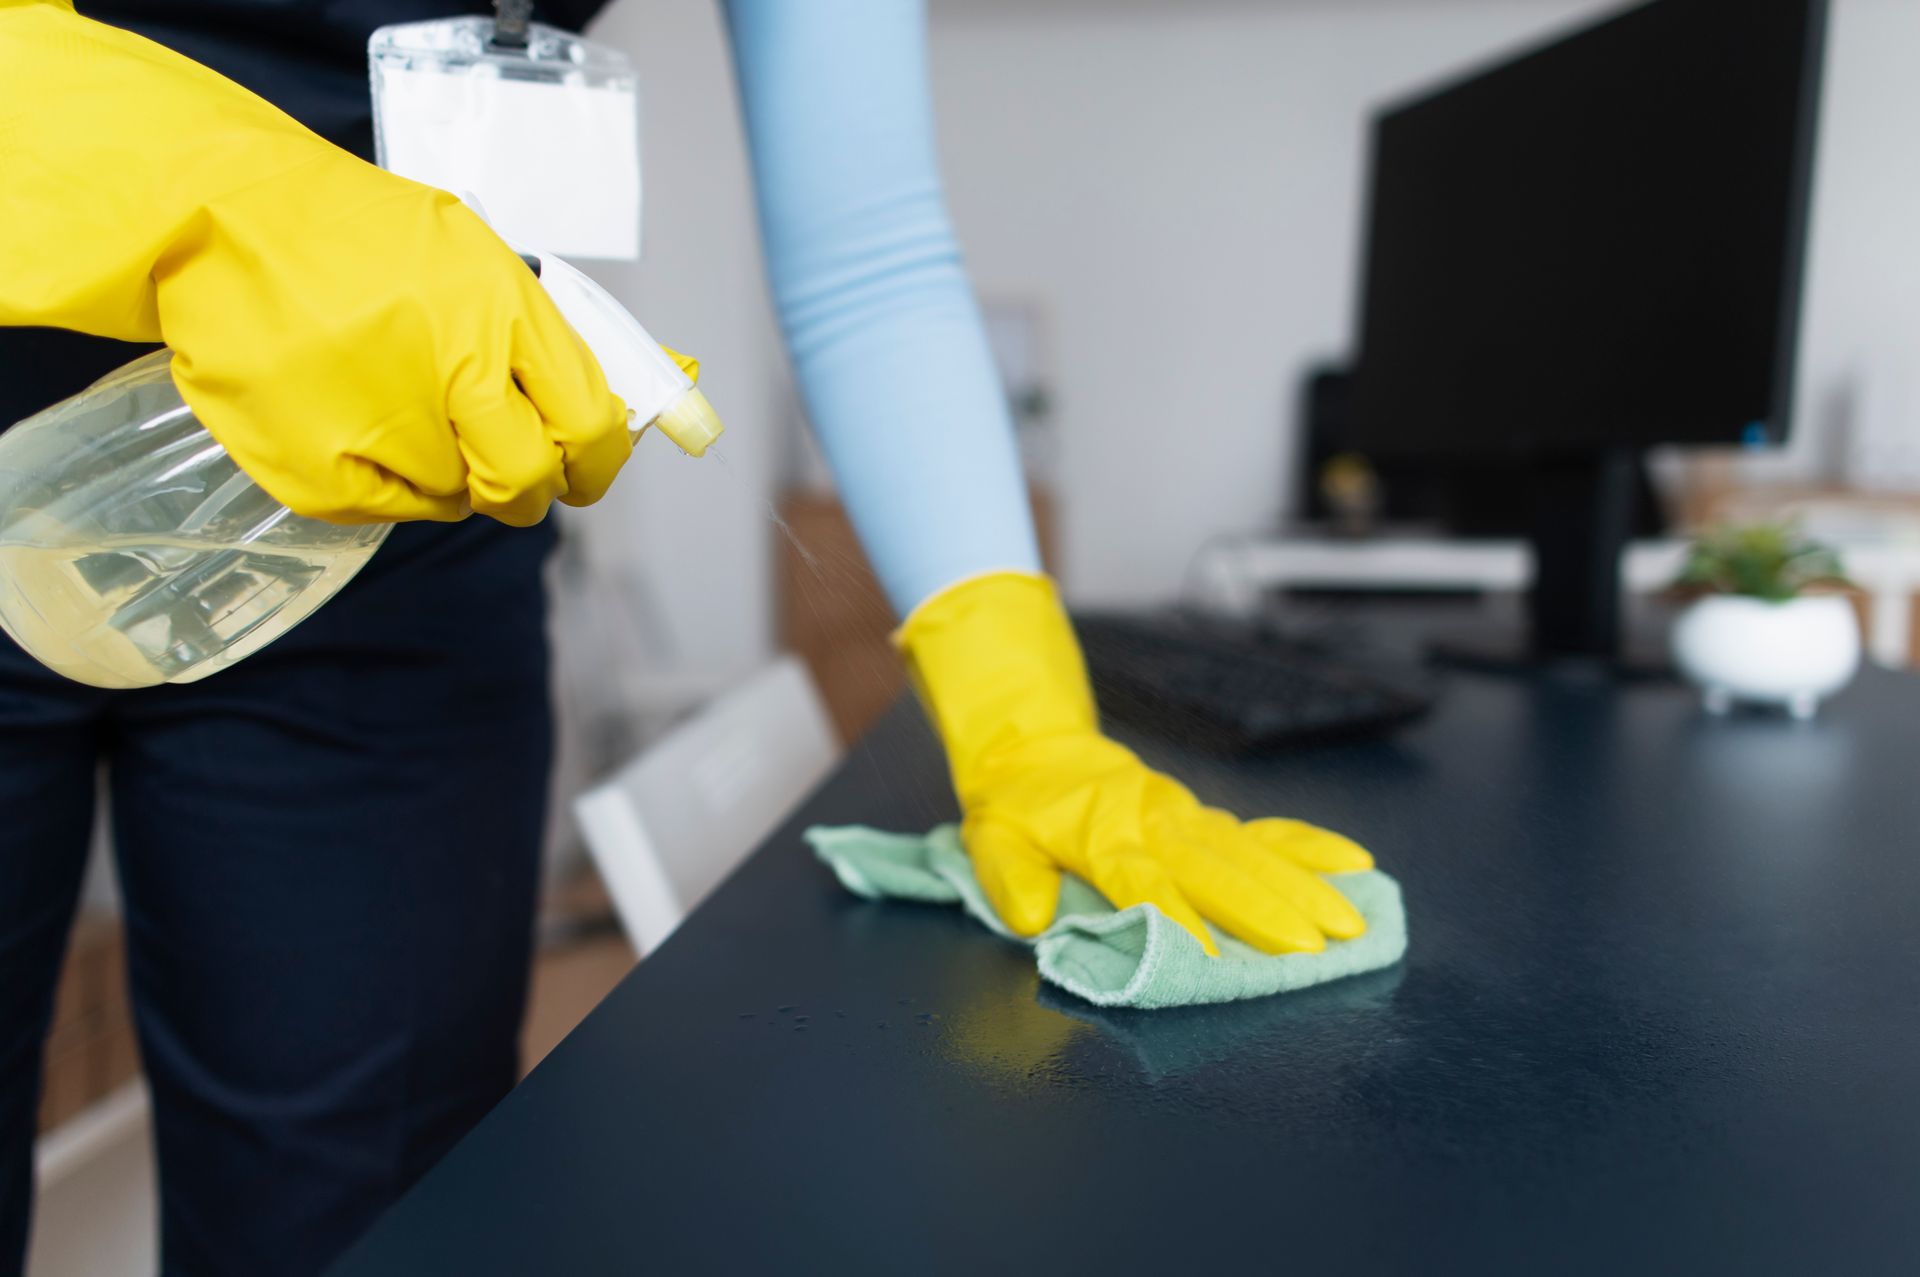 A person wearing yellow gloves is cleaning a desk with a cloth and spray bottle.